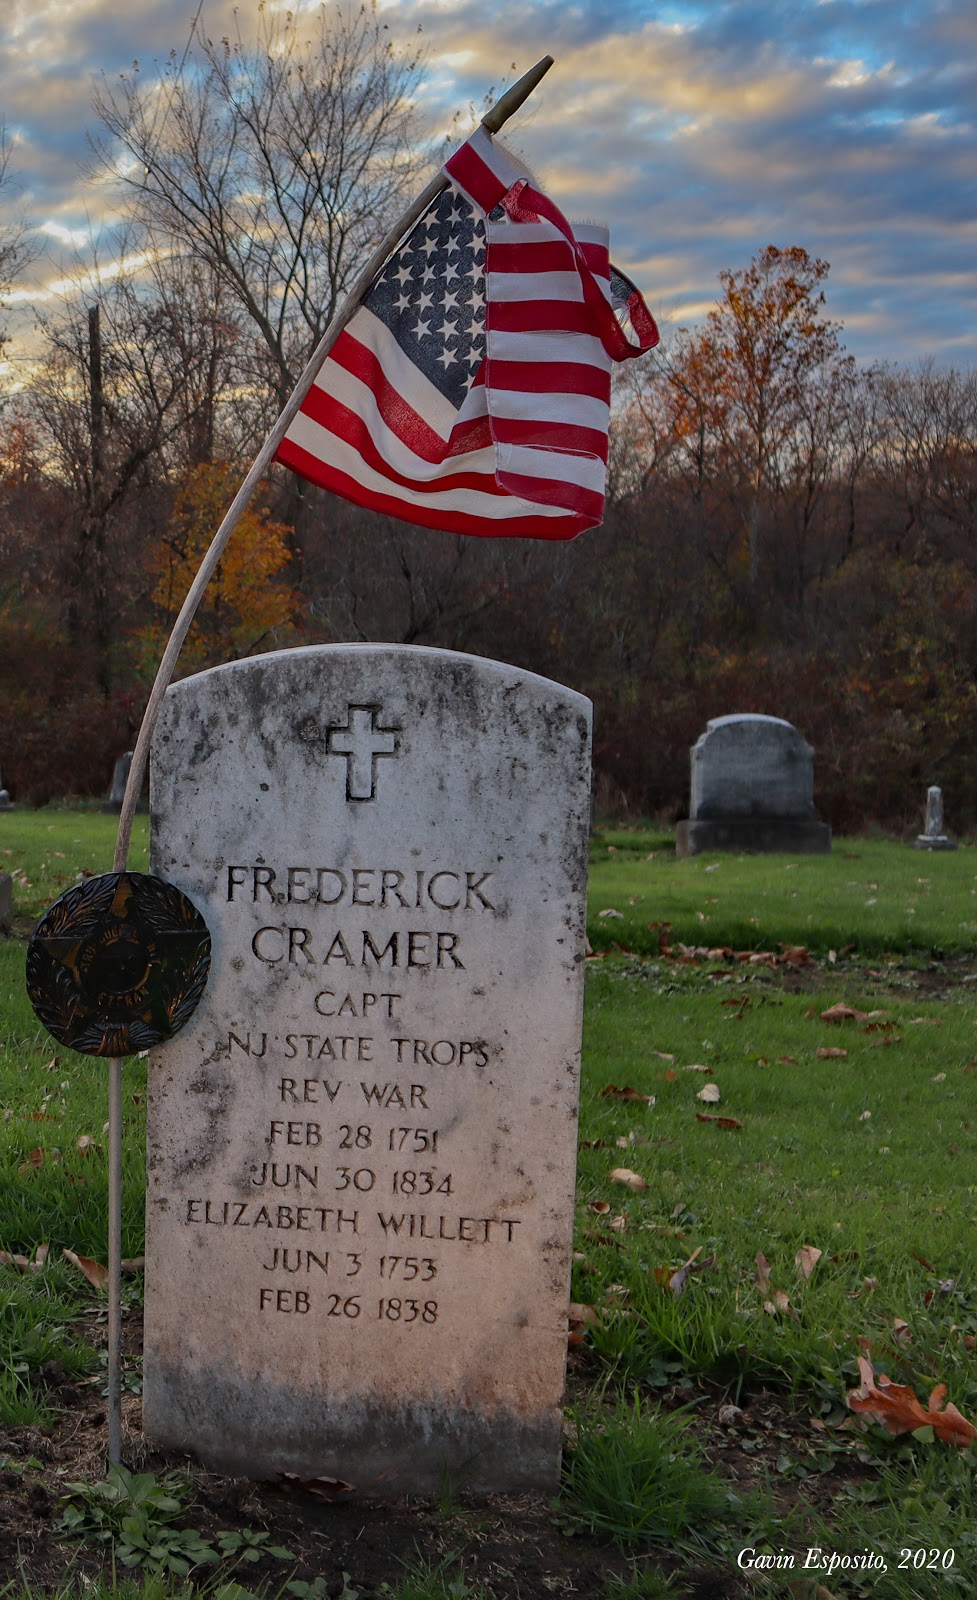 Erected by a descendent within the last decade, Frederick and Elizabeth Cramer’s headstone is the newest in Old North (Photo by Gavin Esposito).